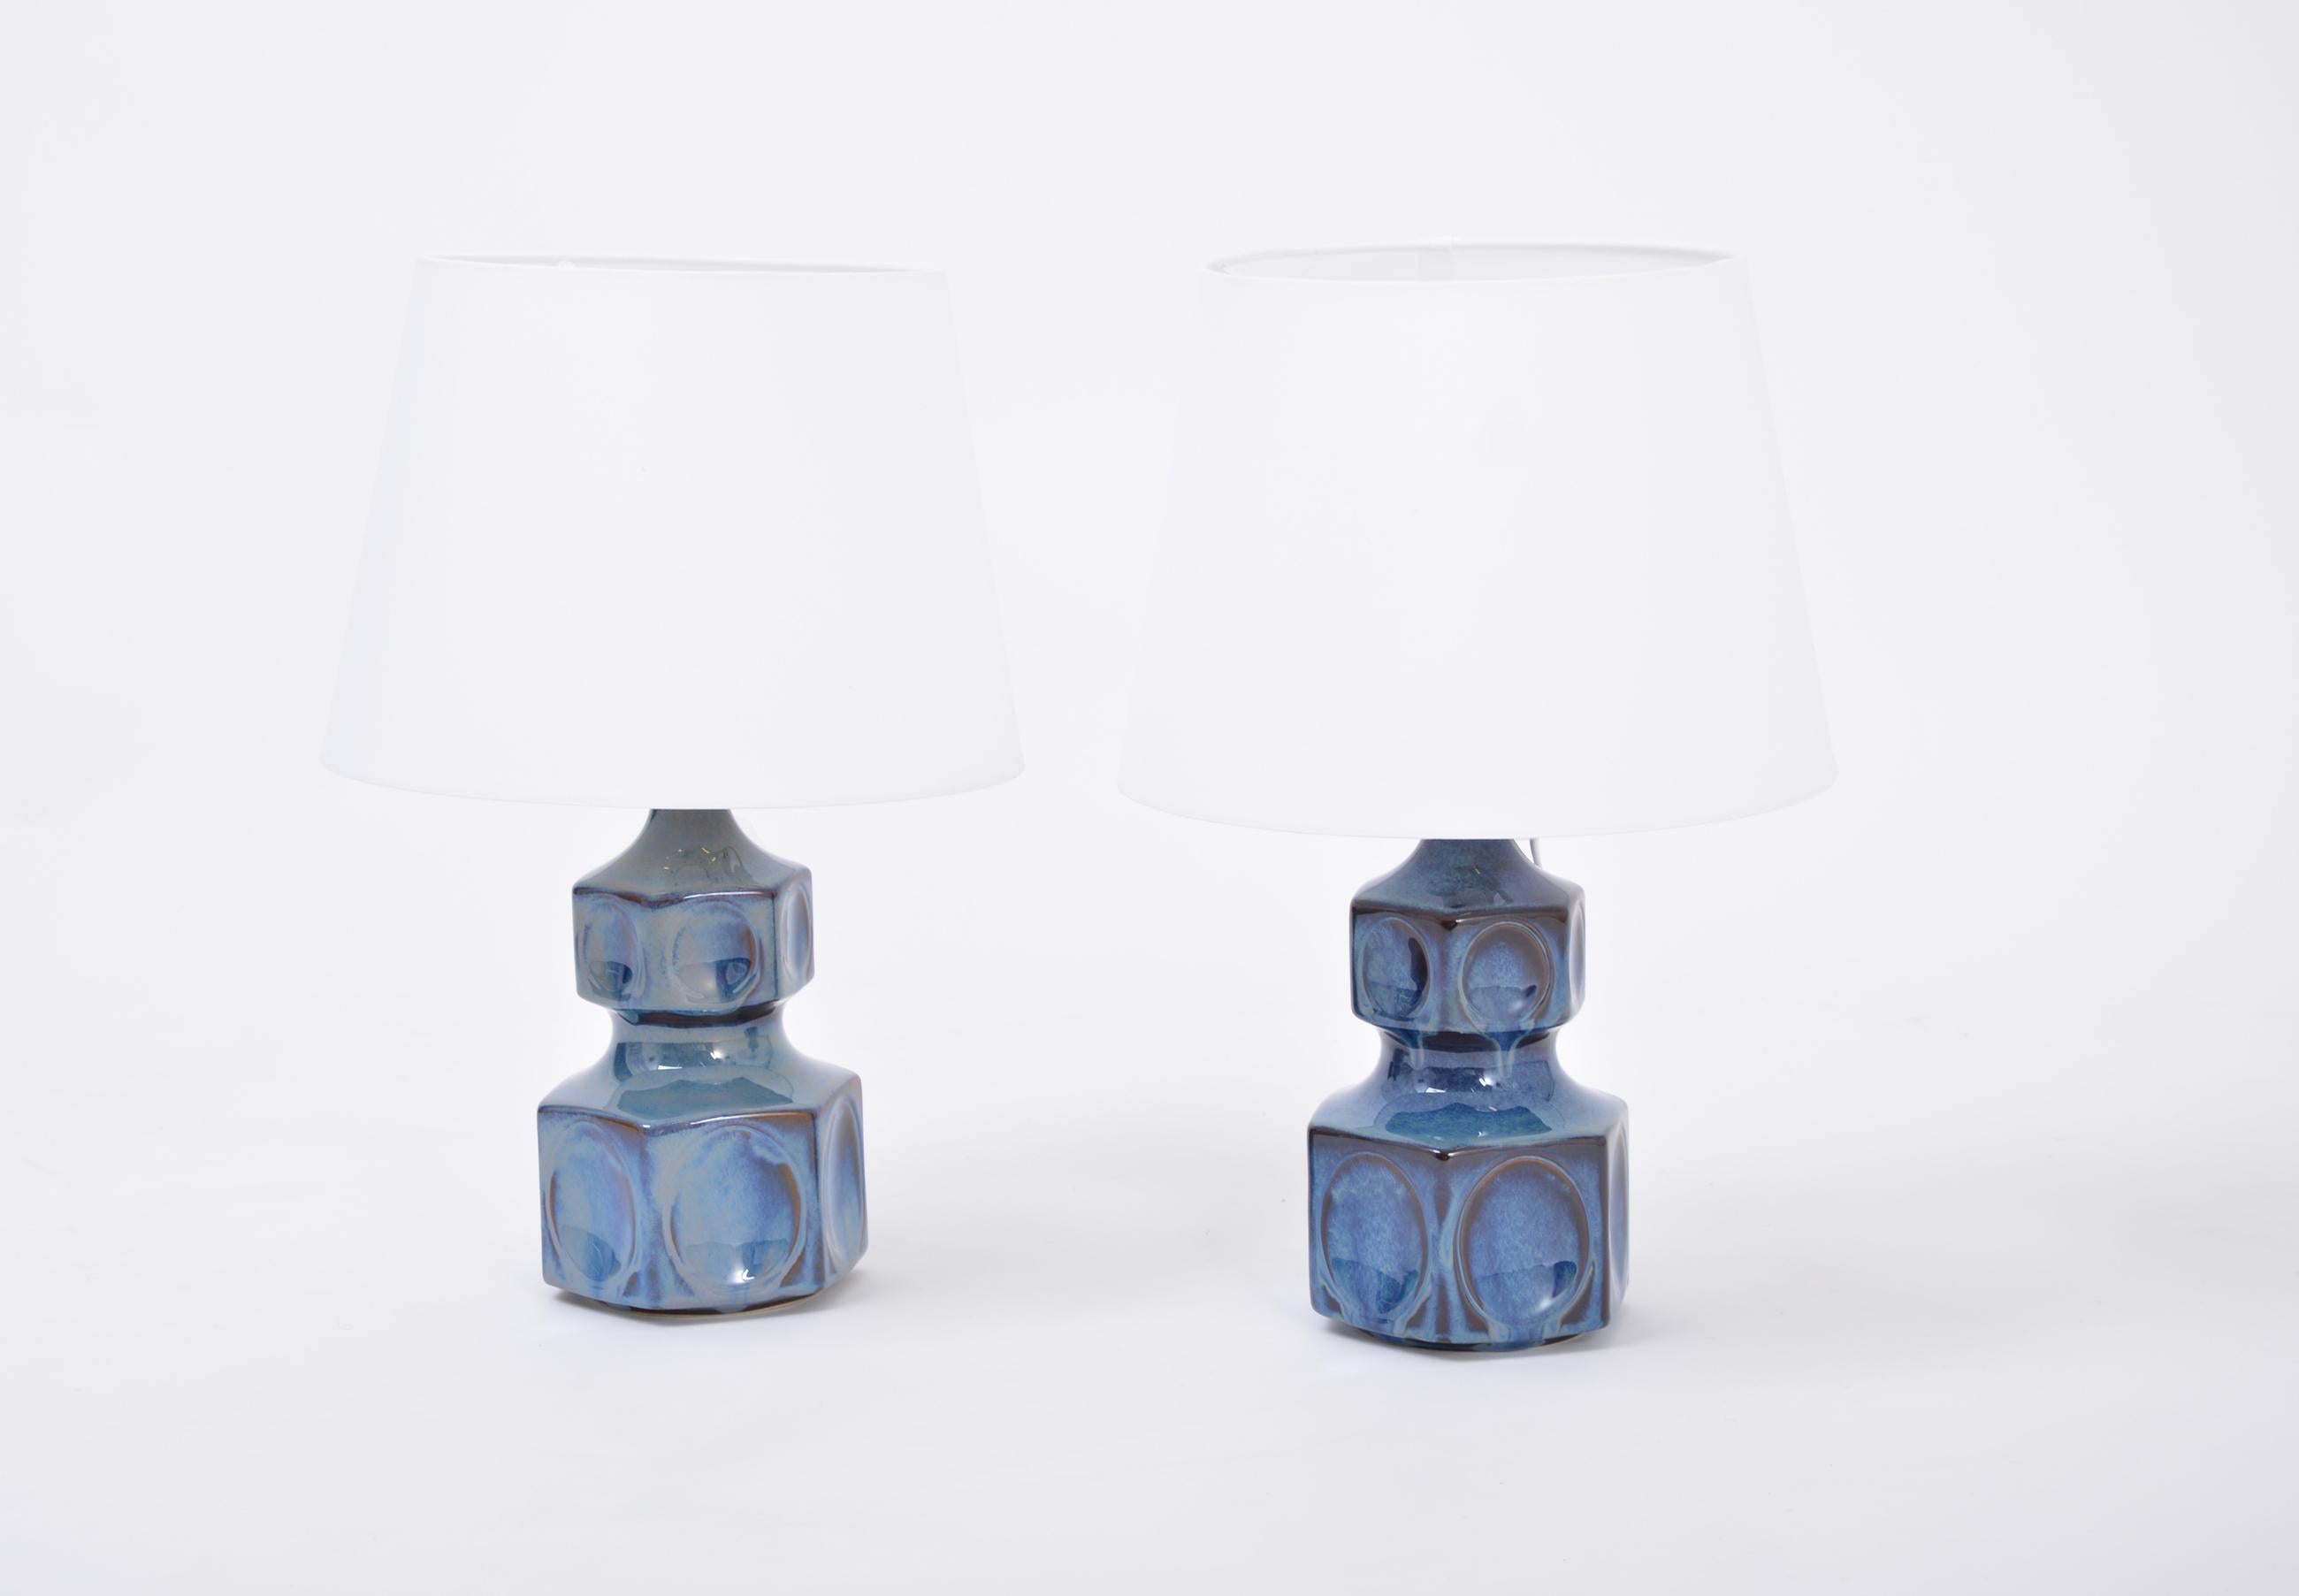 Pair of blue Danish midcentury table lamps by Einar Johansen for Soholm
Pair of sculptural table lamps model 1062 designed by Einar Johansen and produced by Danish company Soholm most probably in the 1960s. The lamps are made of stoneware with blue